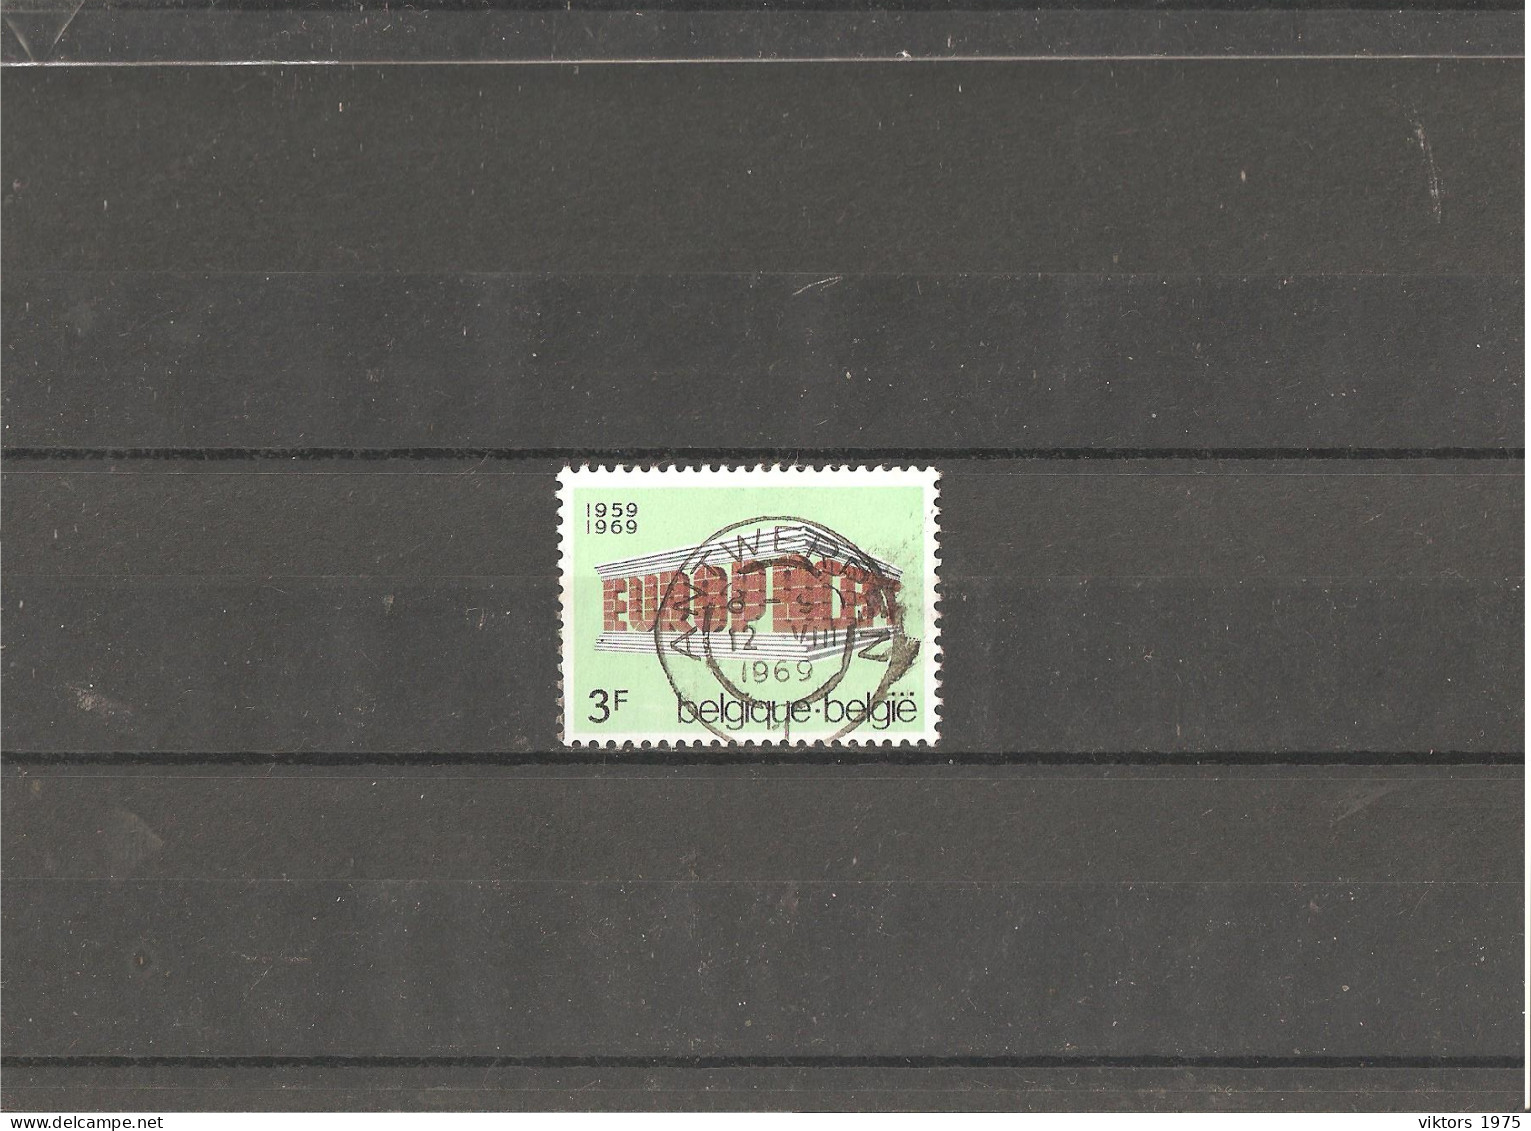 Used Stamp Nr.1546 In MICHEL Catalog - Used Stamps